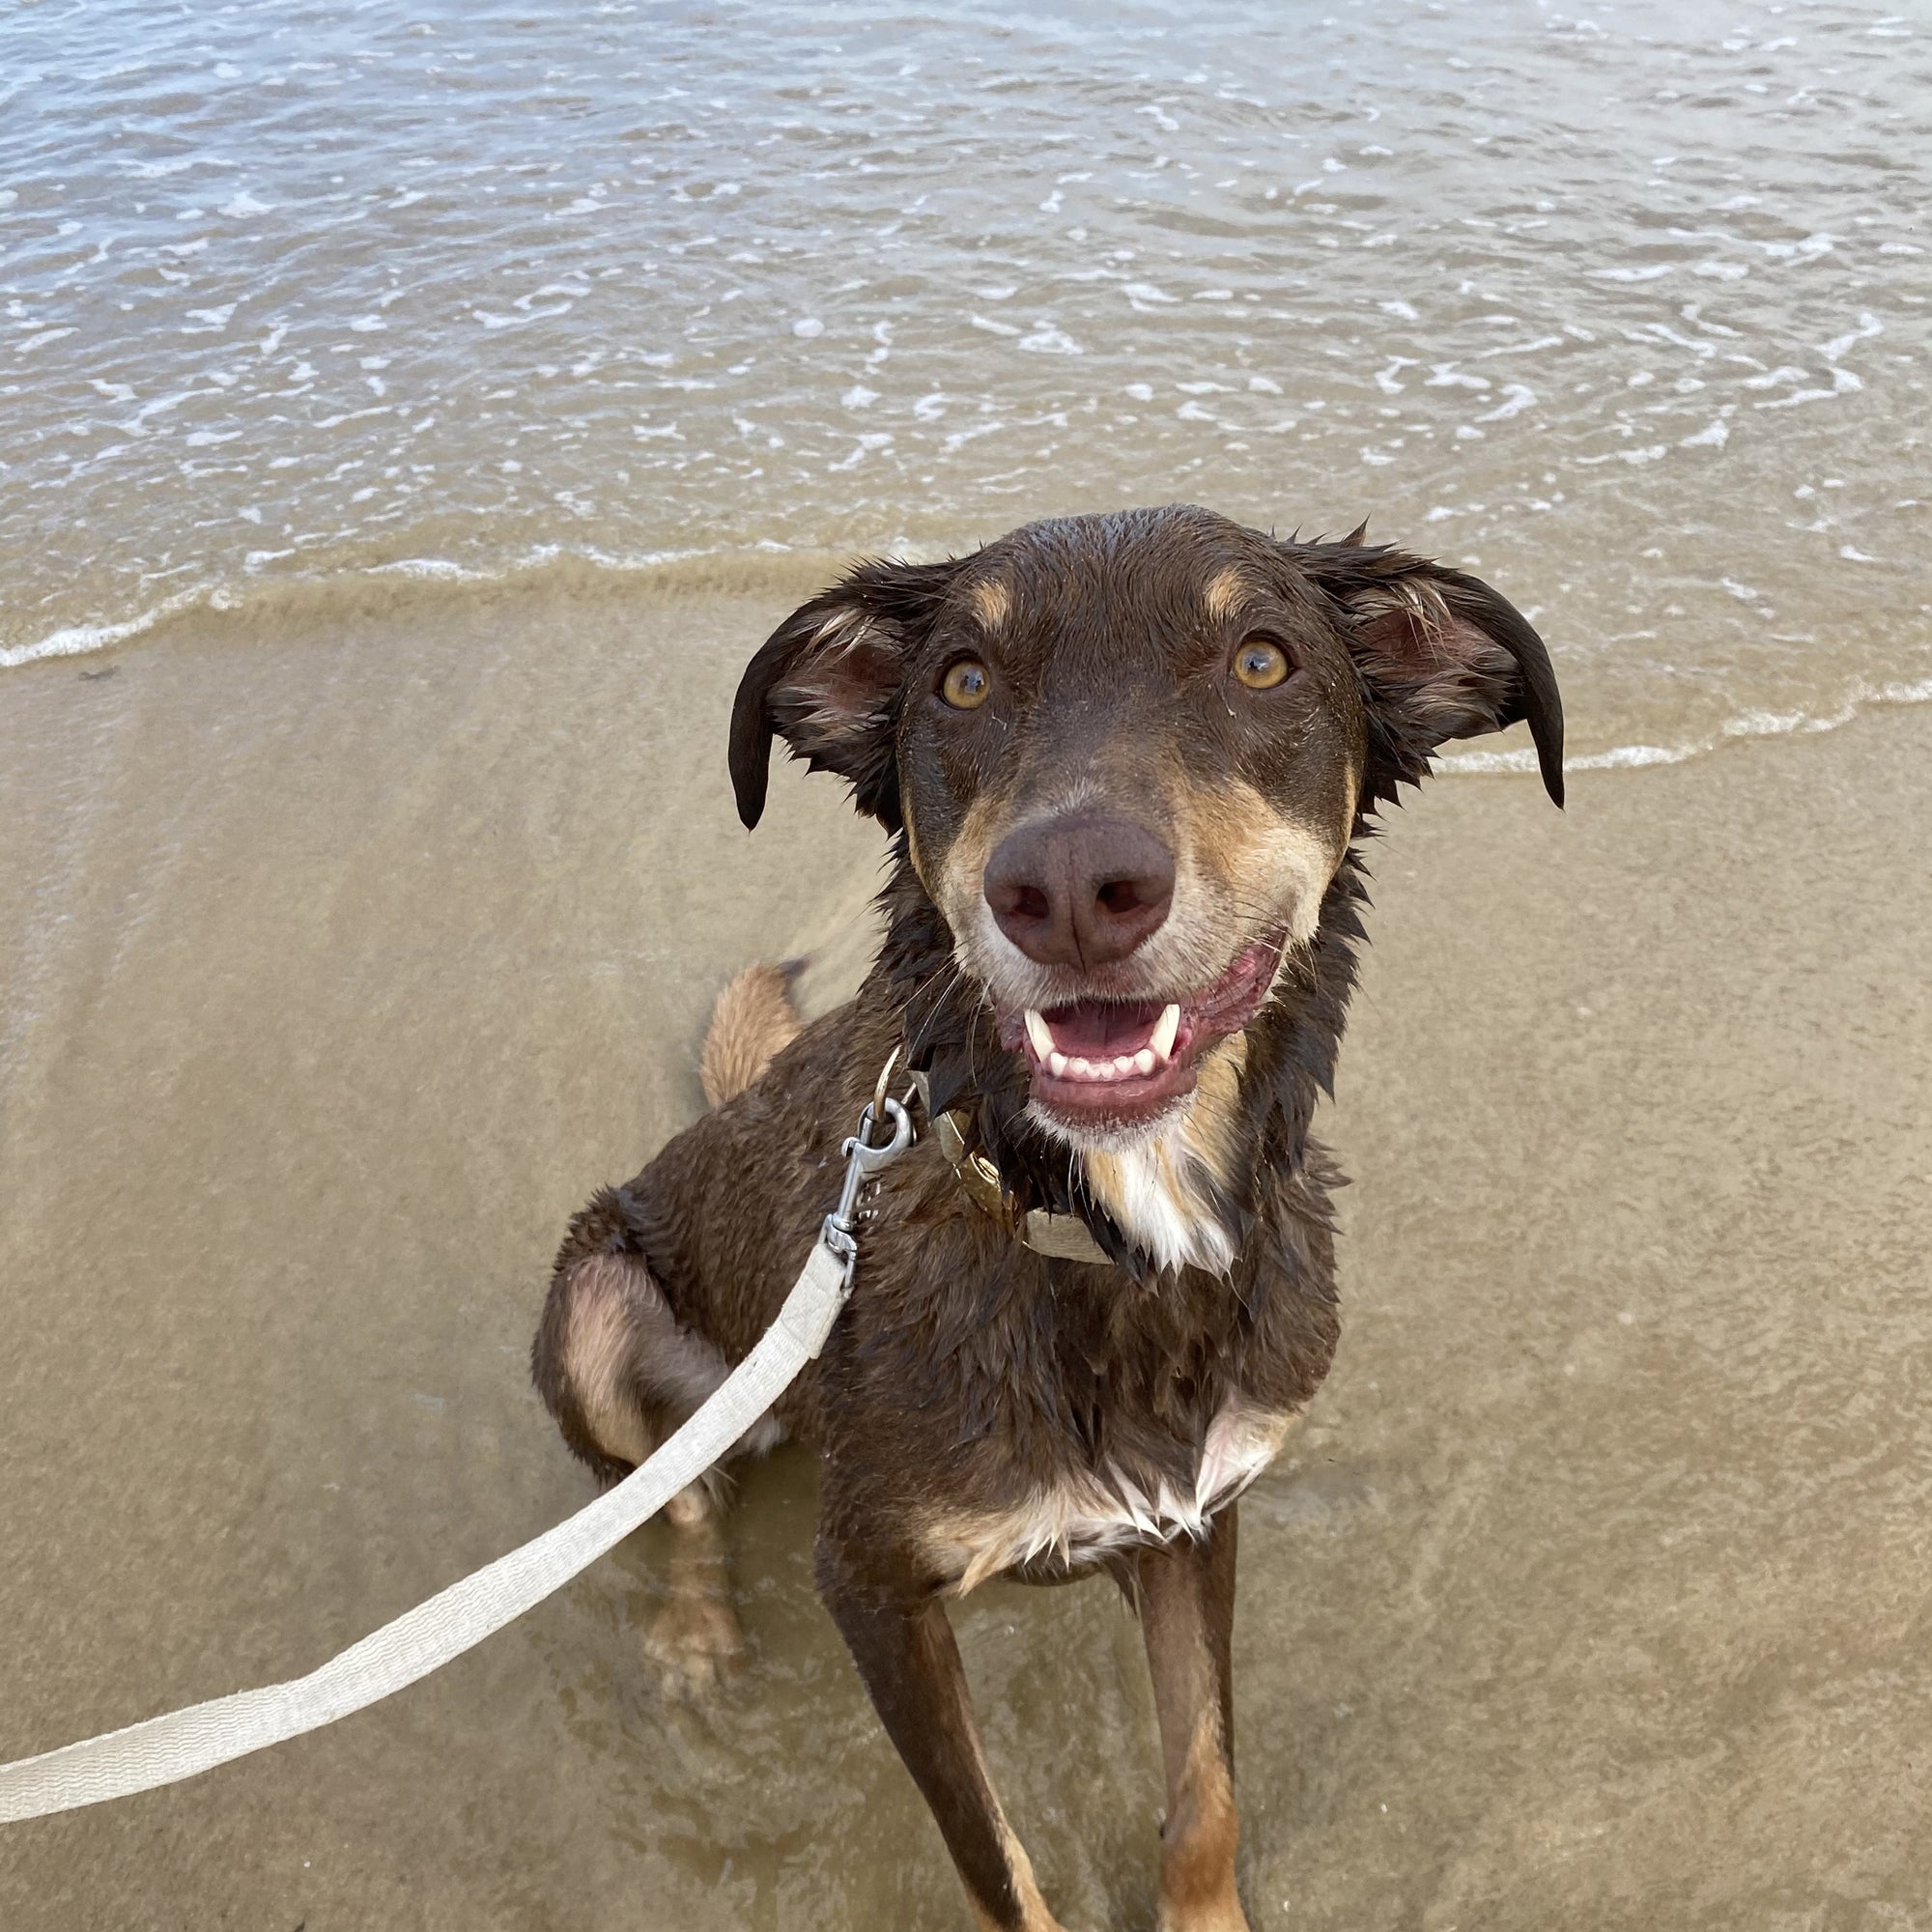 Marlow, Bohemi kelpie dog looking happy sitting on wet sand close to the waters edge.